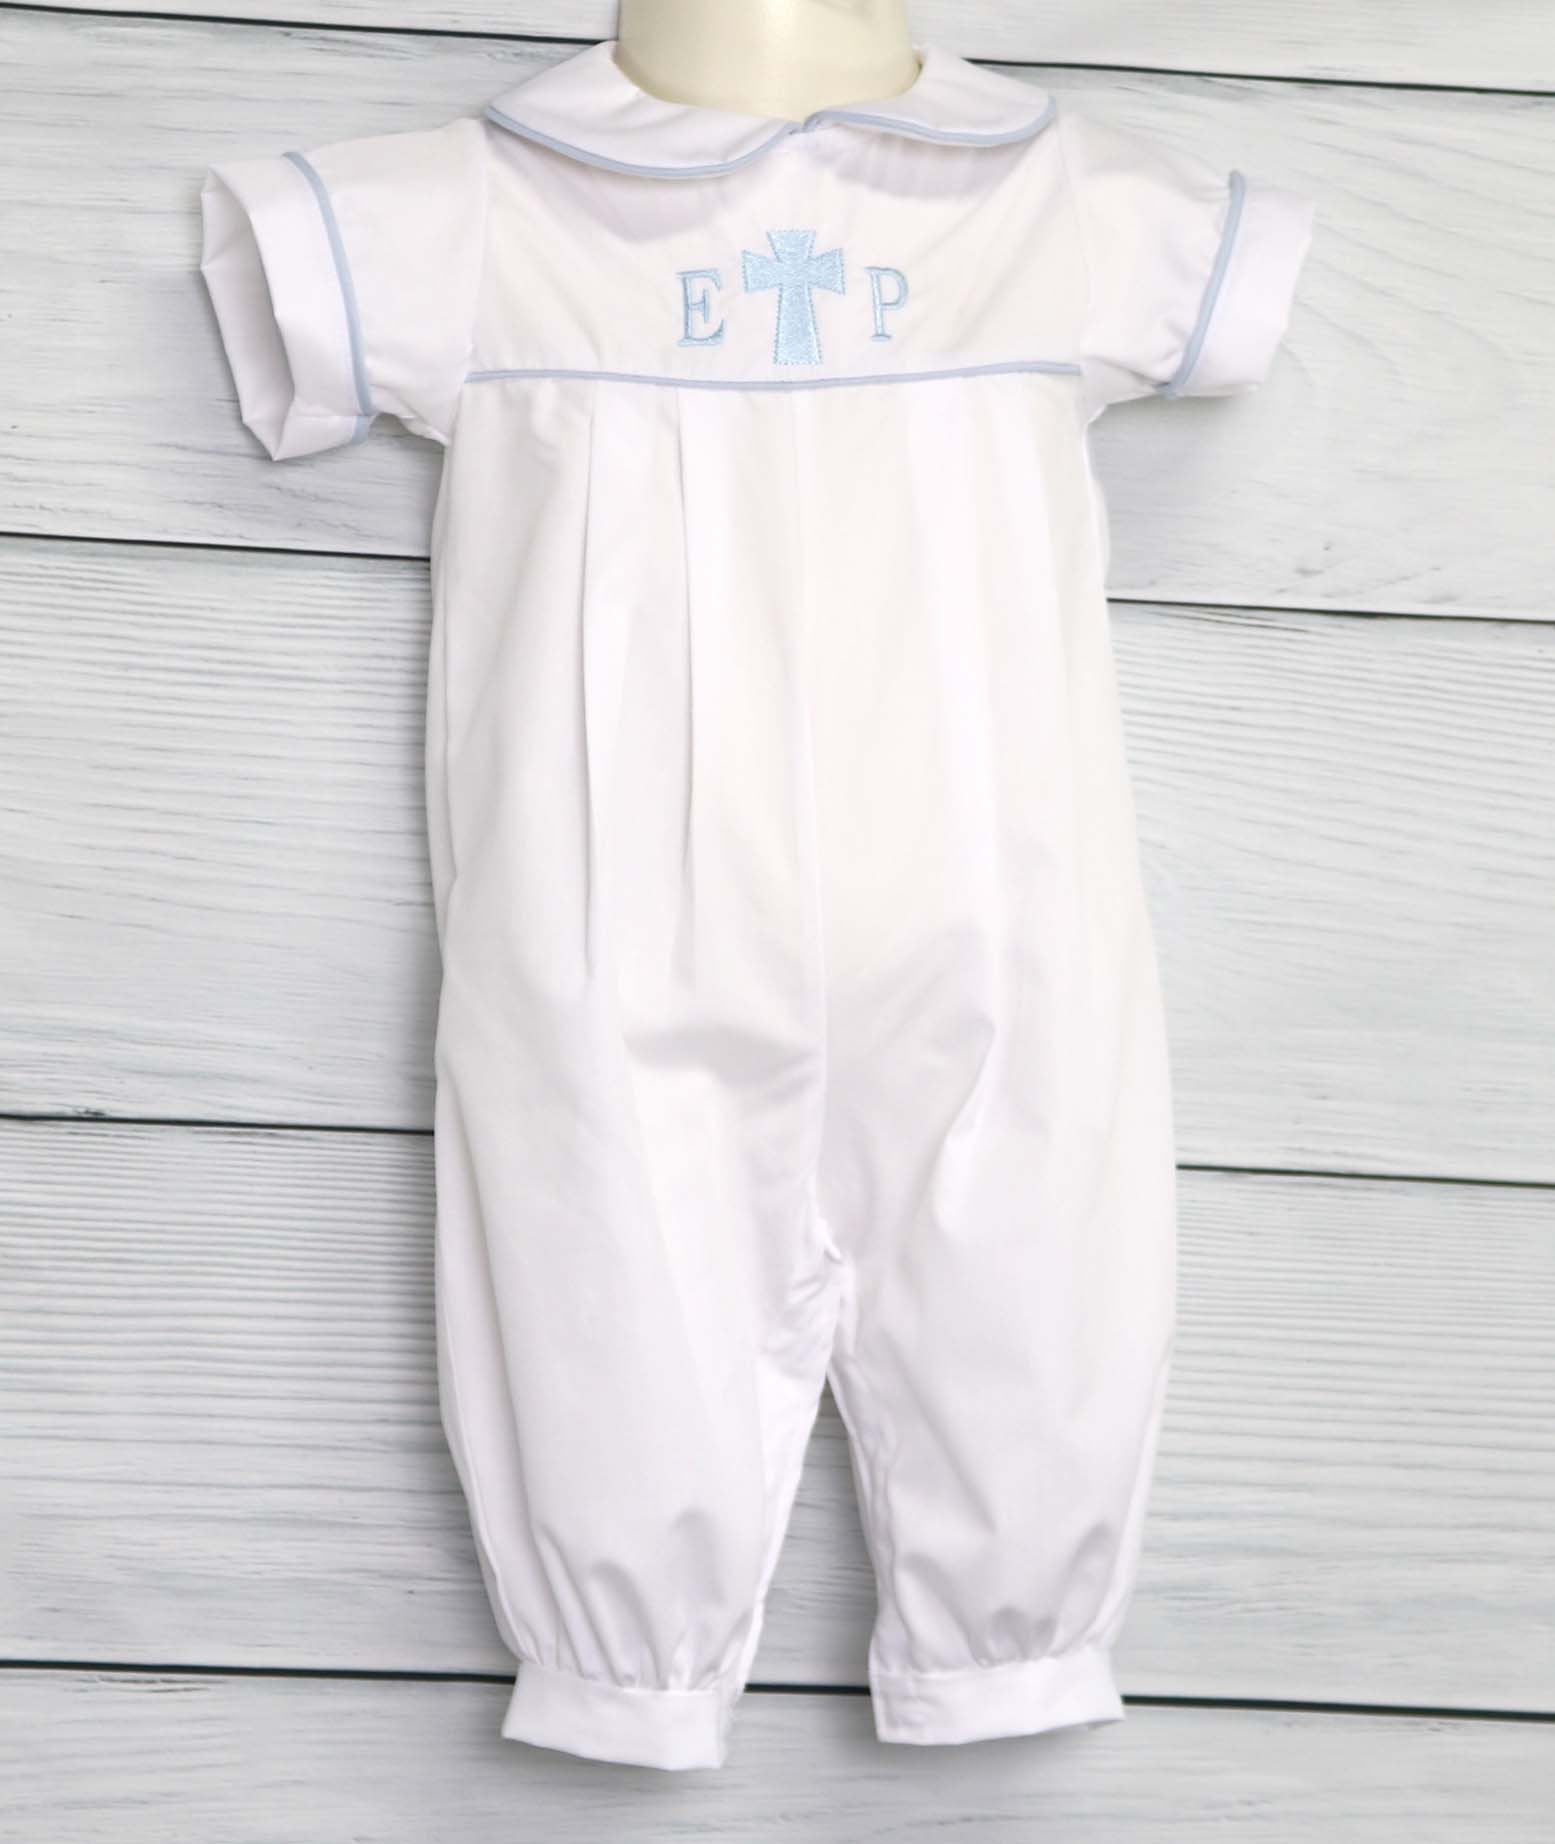 childrens christening outfits